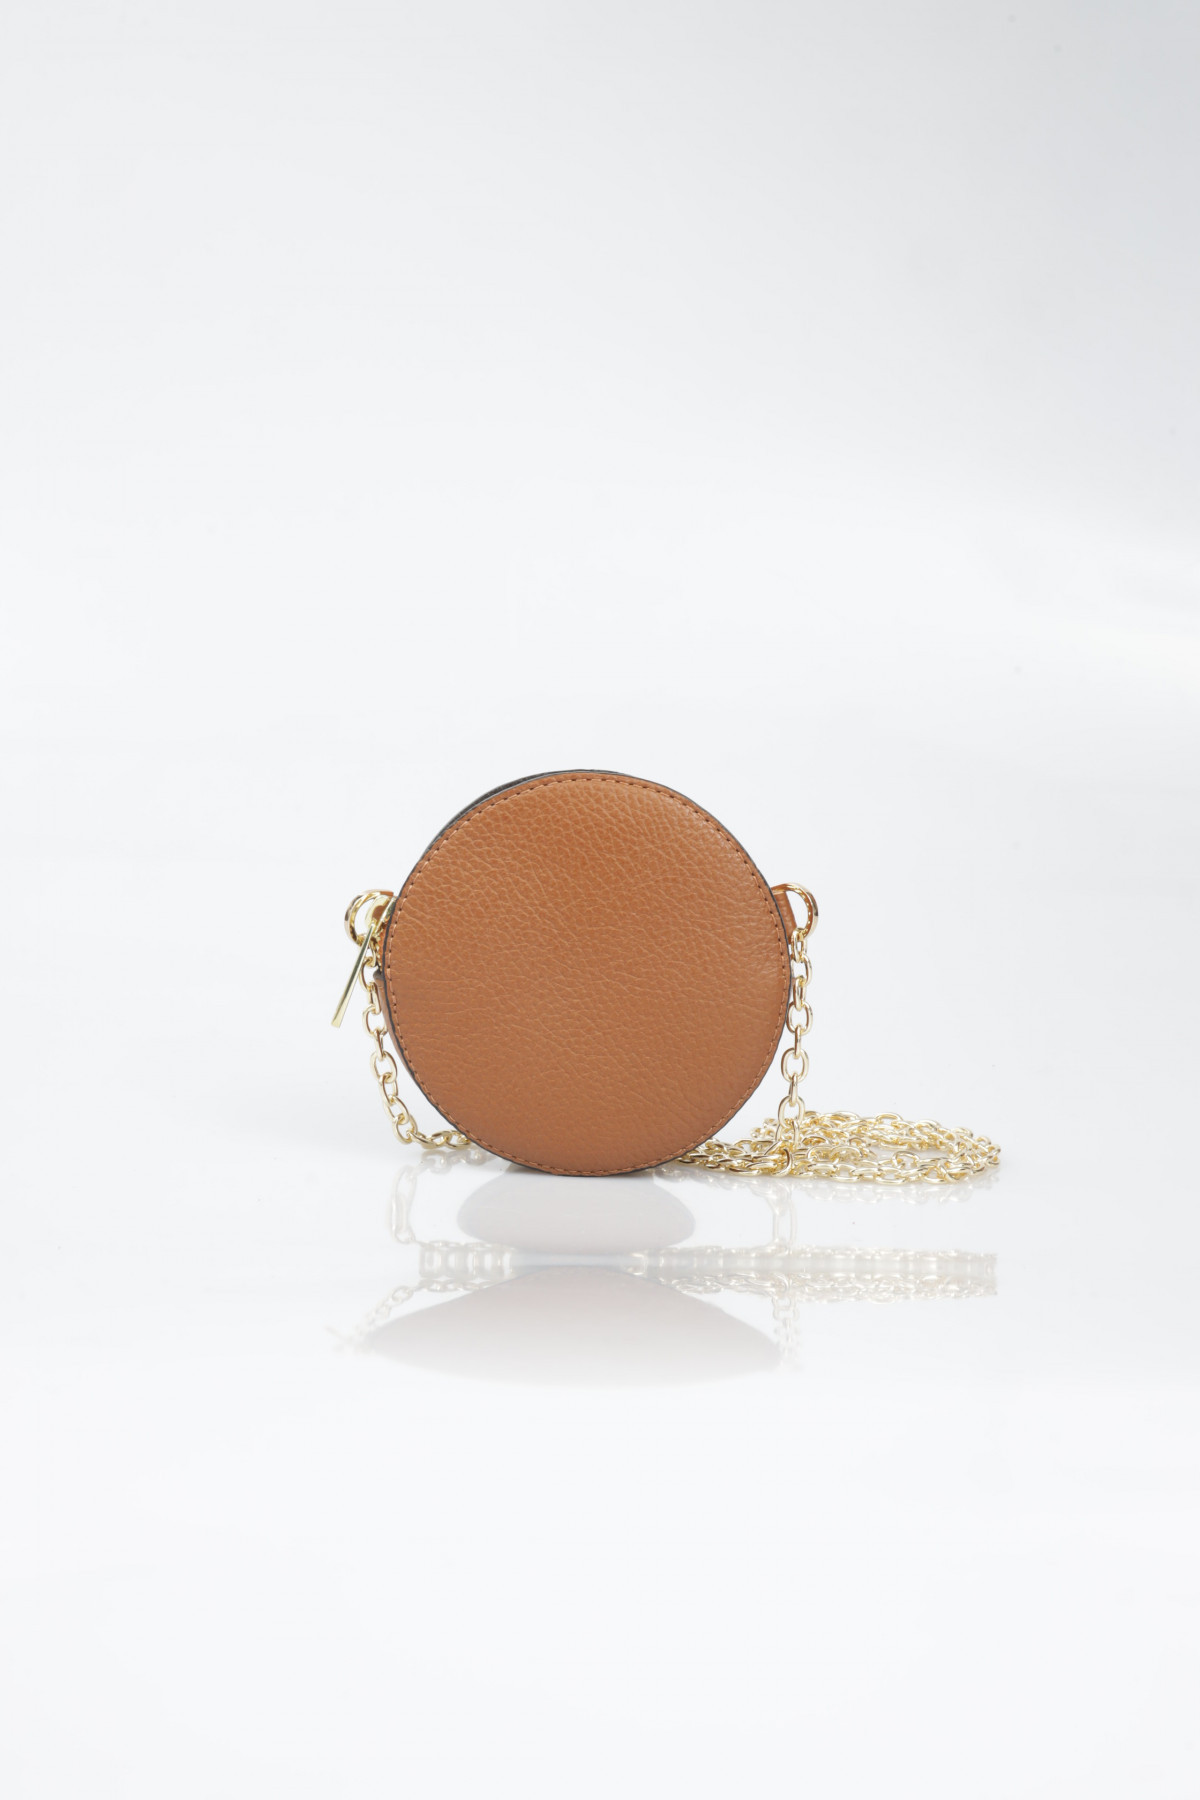 Circular Coin Purse in Genuine Leather with Golden Shoulder Strap